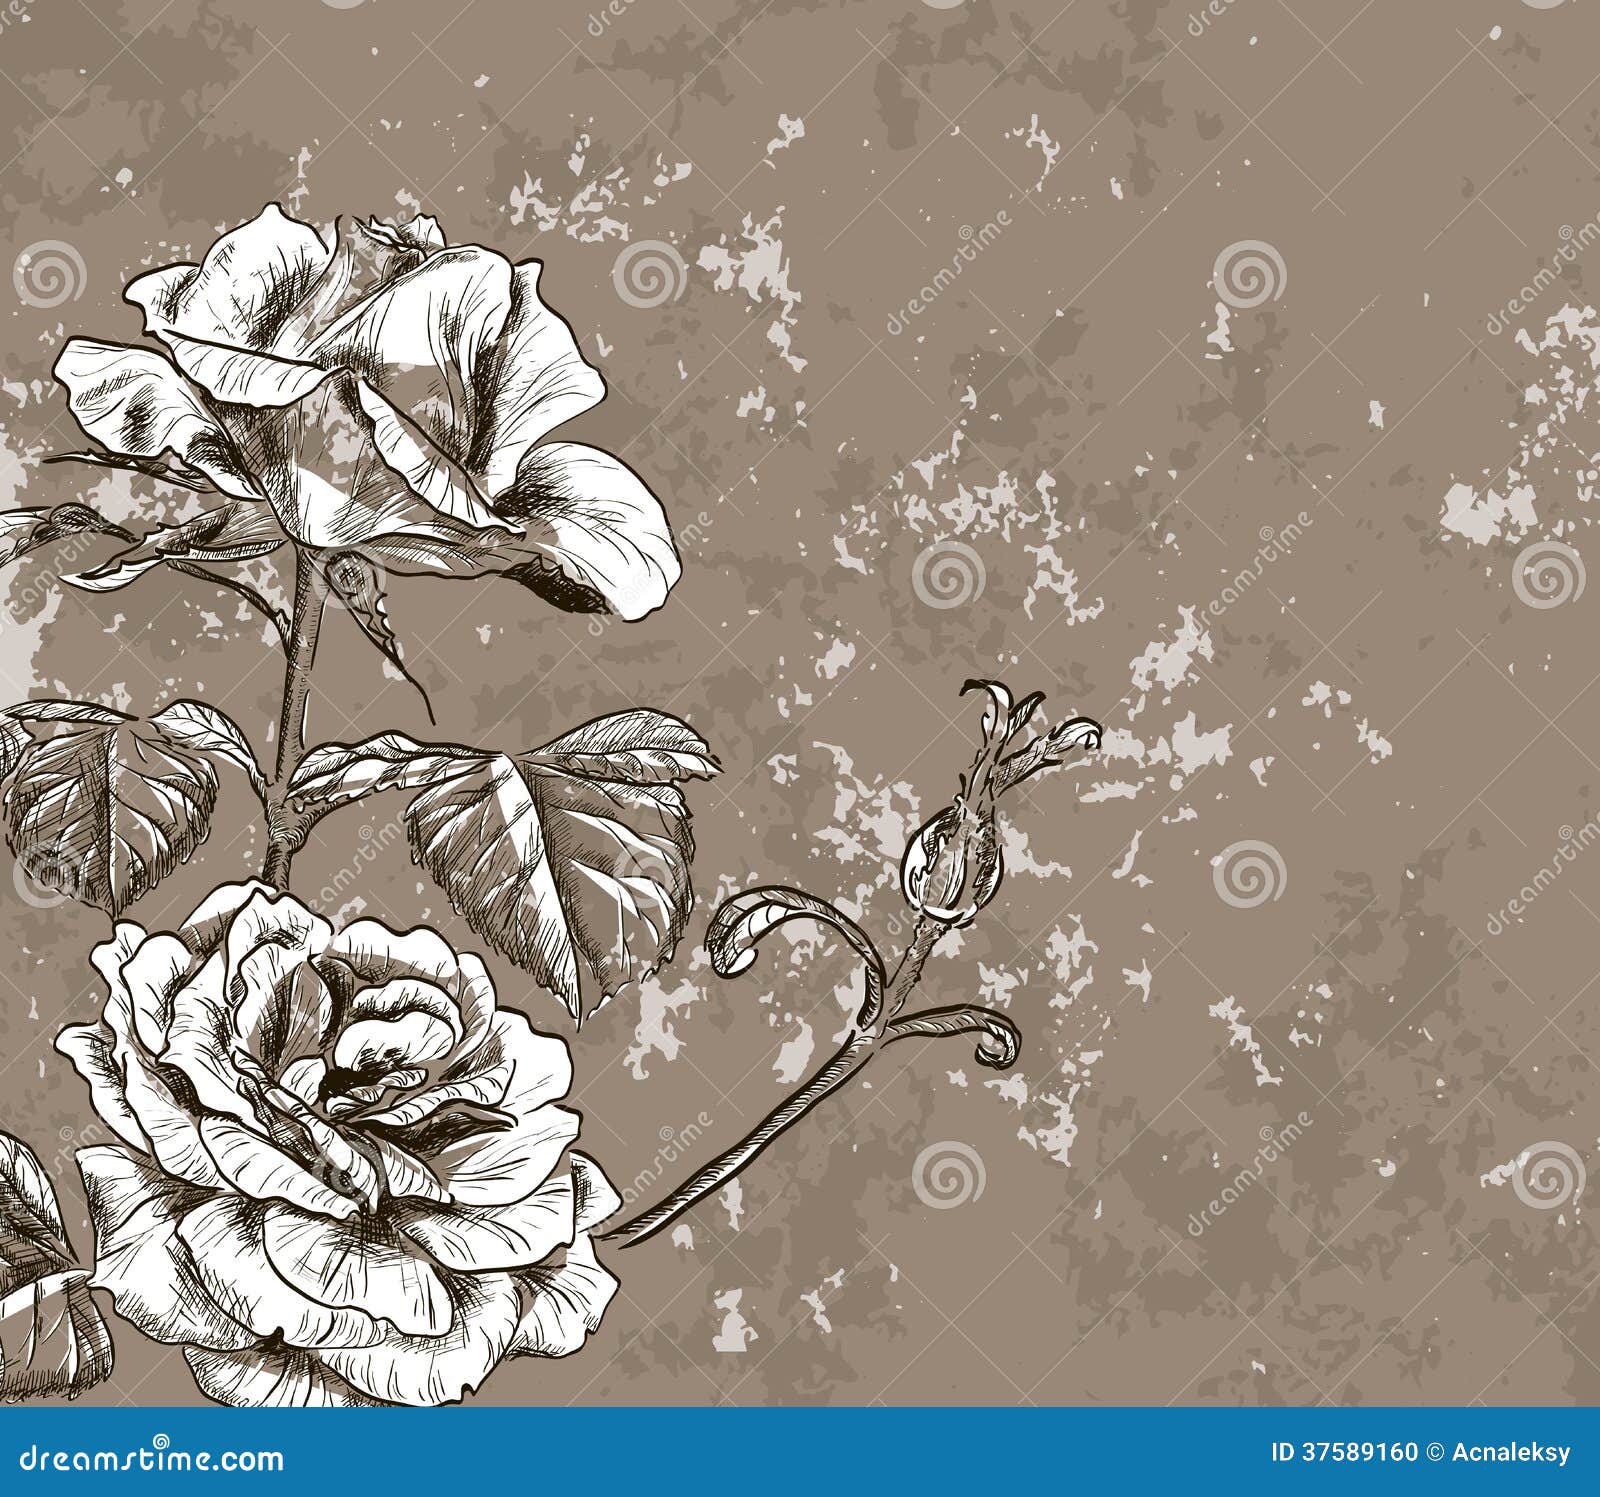 vintage floral backgrounds with roses